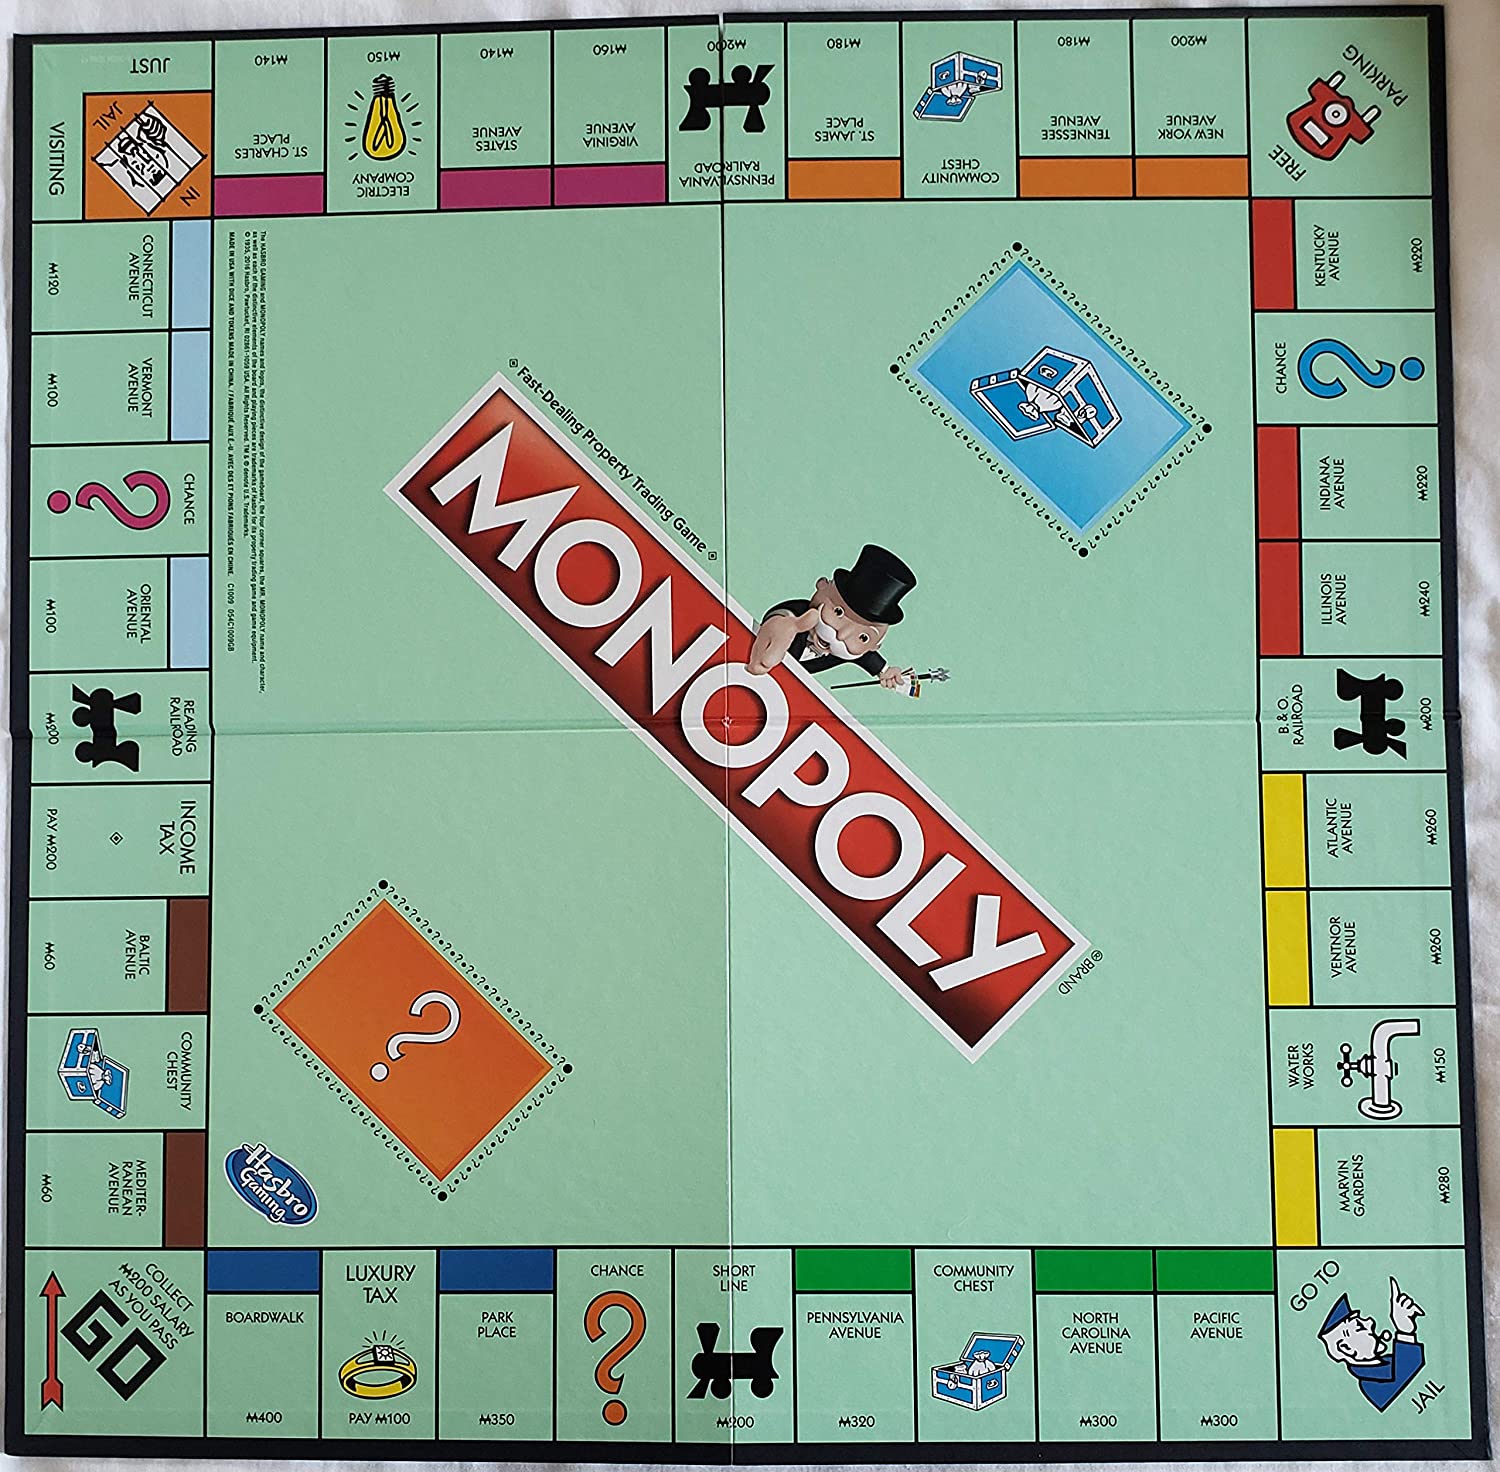 Most expensive property on the original american monopoly board - honstaff